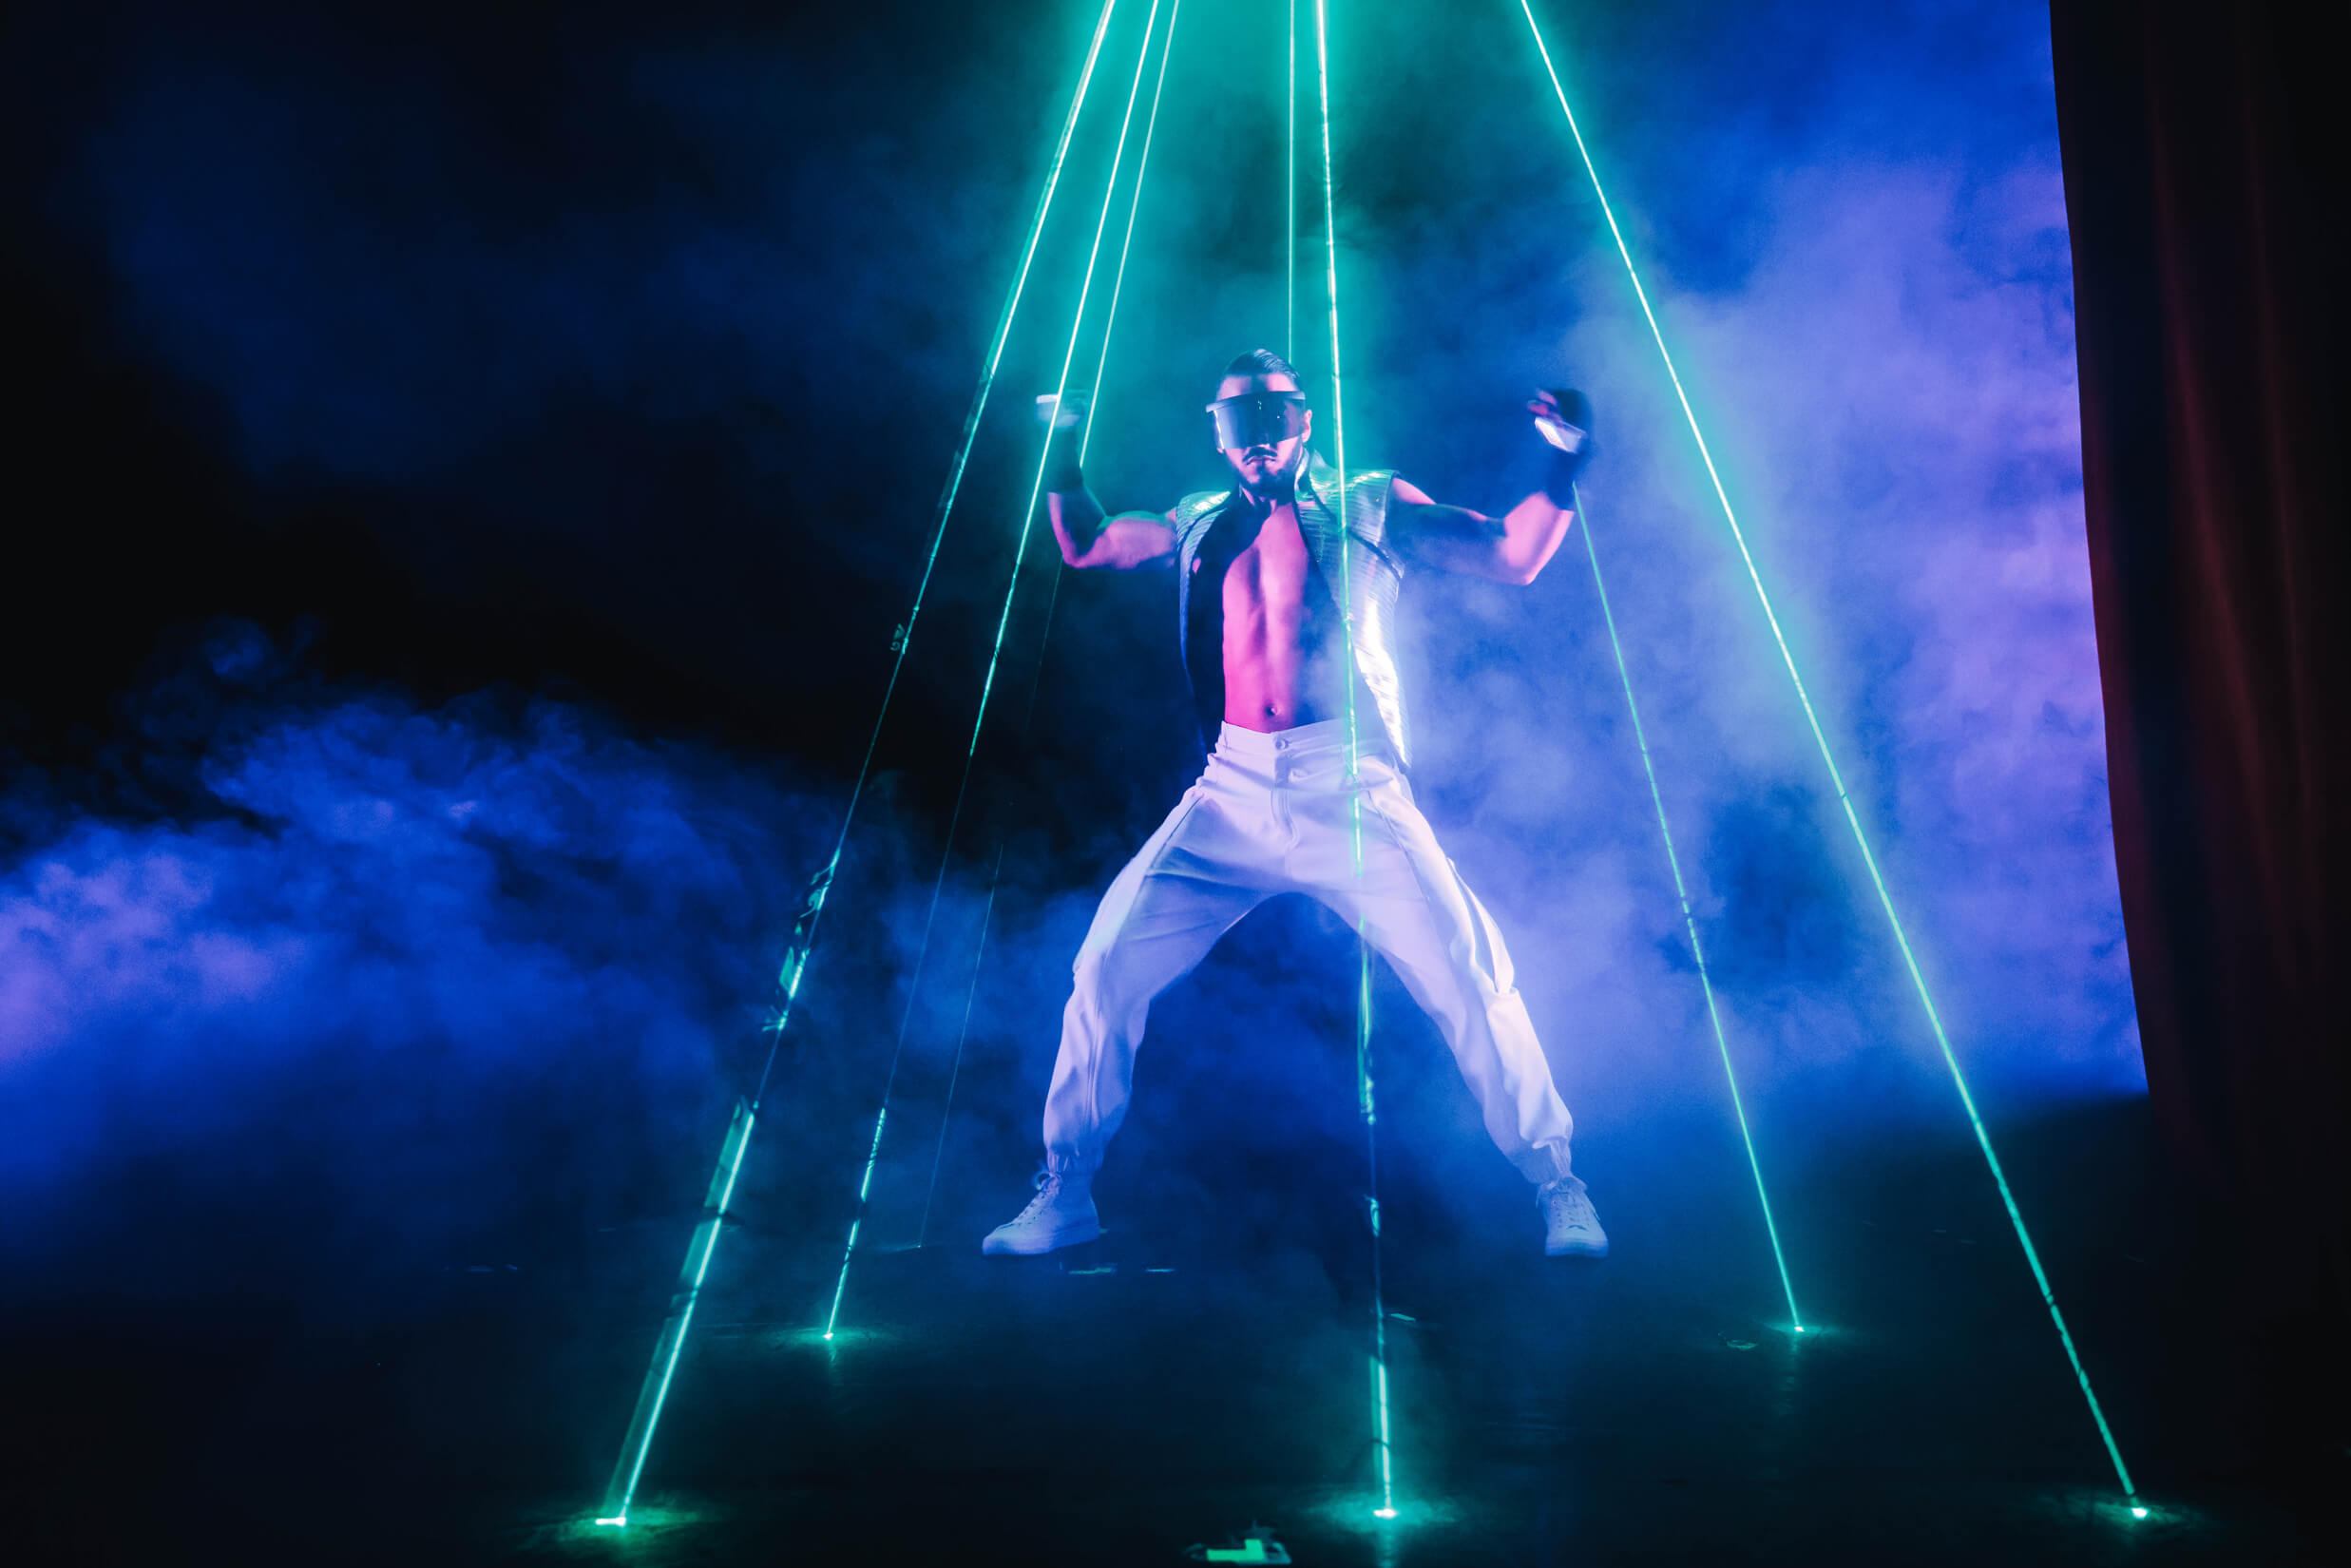 Billionaire performer on stage with lasers